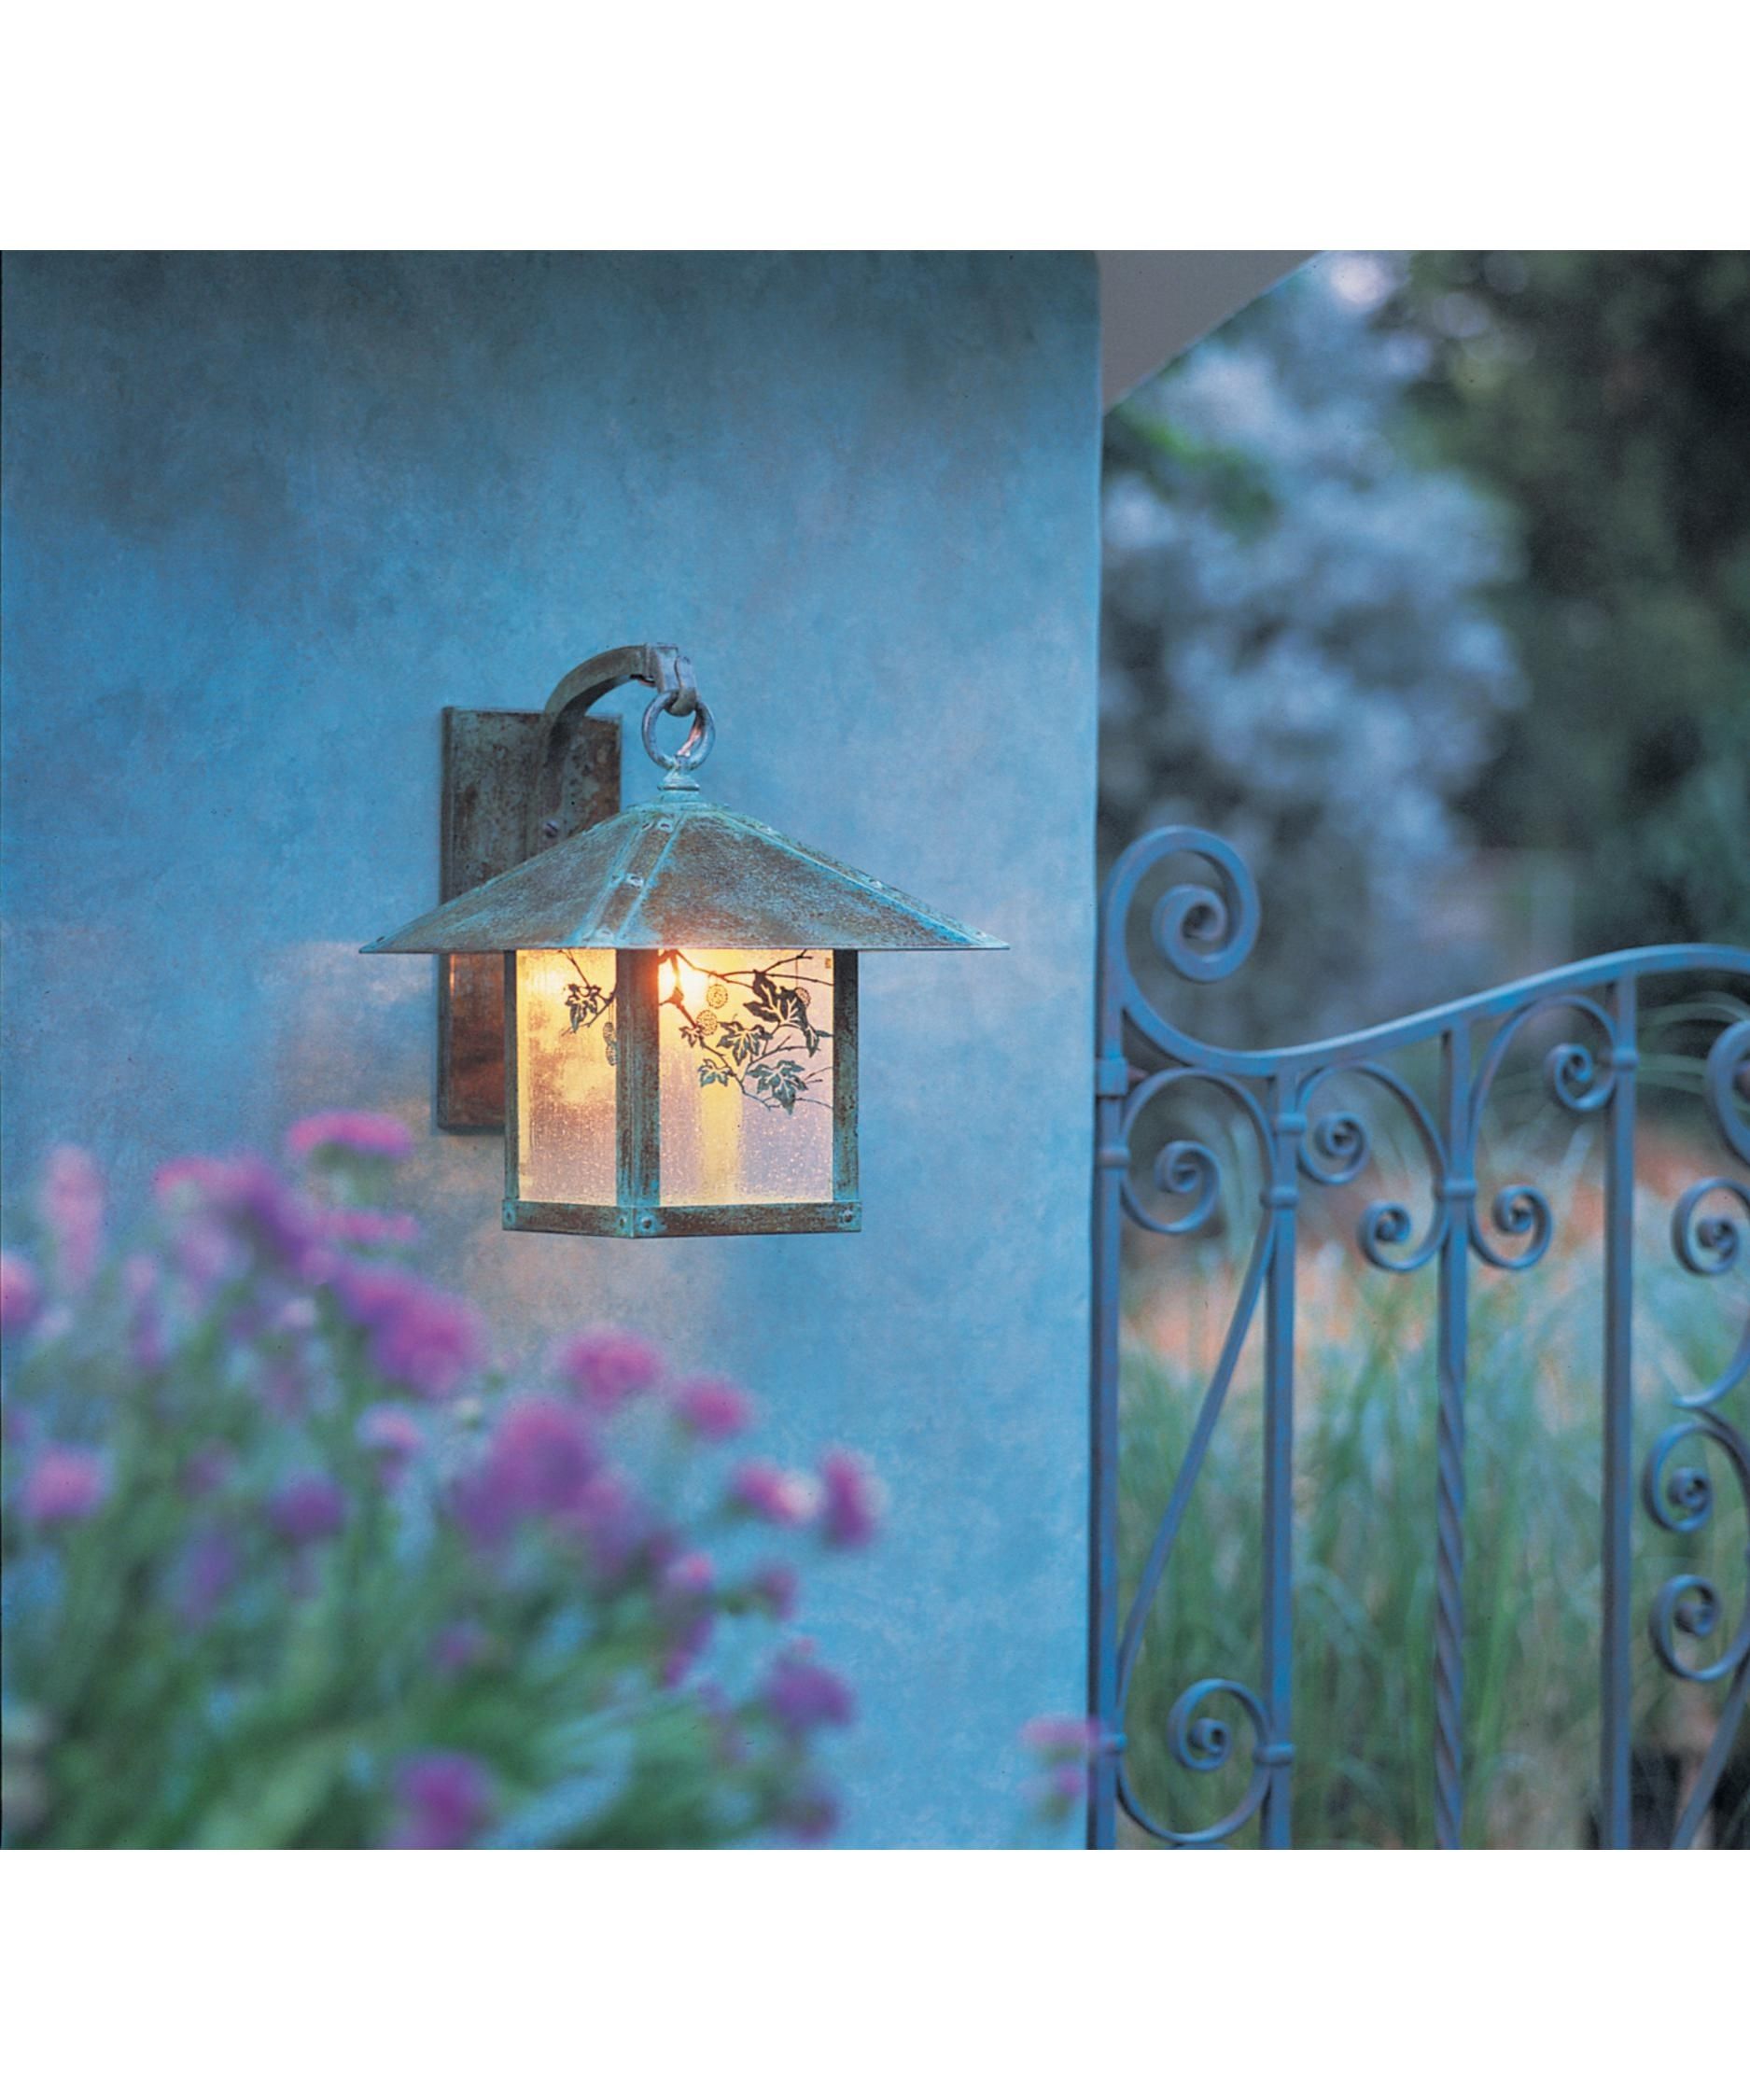 Outdoor And Patio: Outdoor Wall Accent Lighting With Artsitic Floral Pertaining To Outdoor Wall Accent Lighting (View 6 of 15)